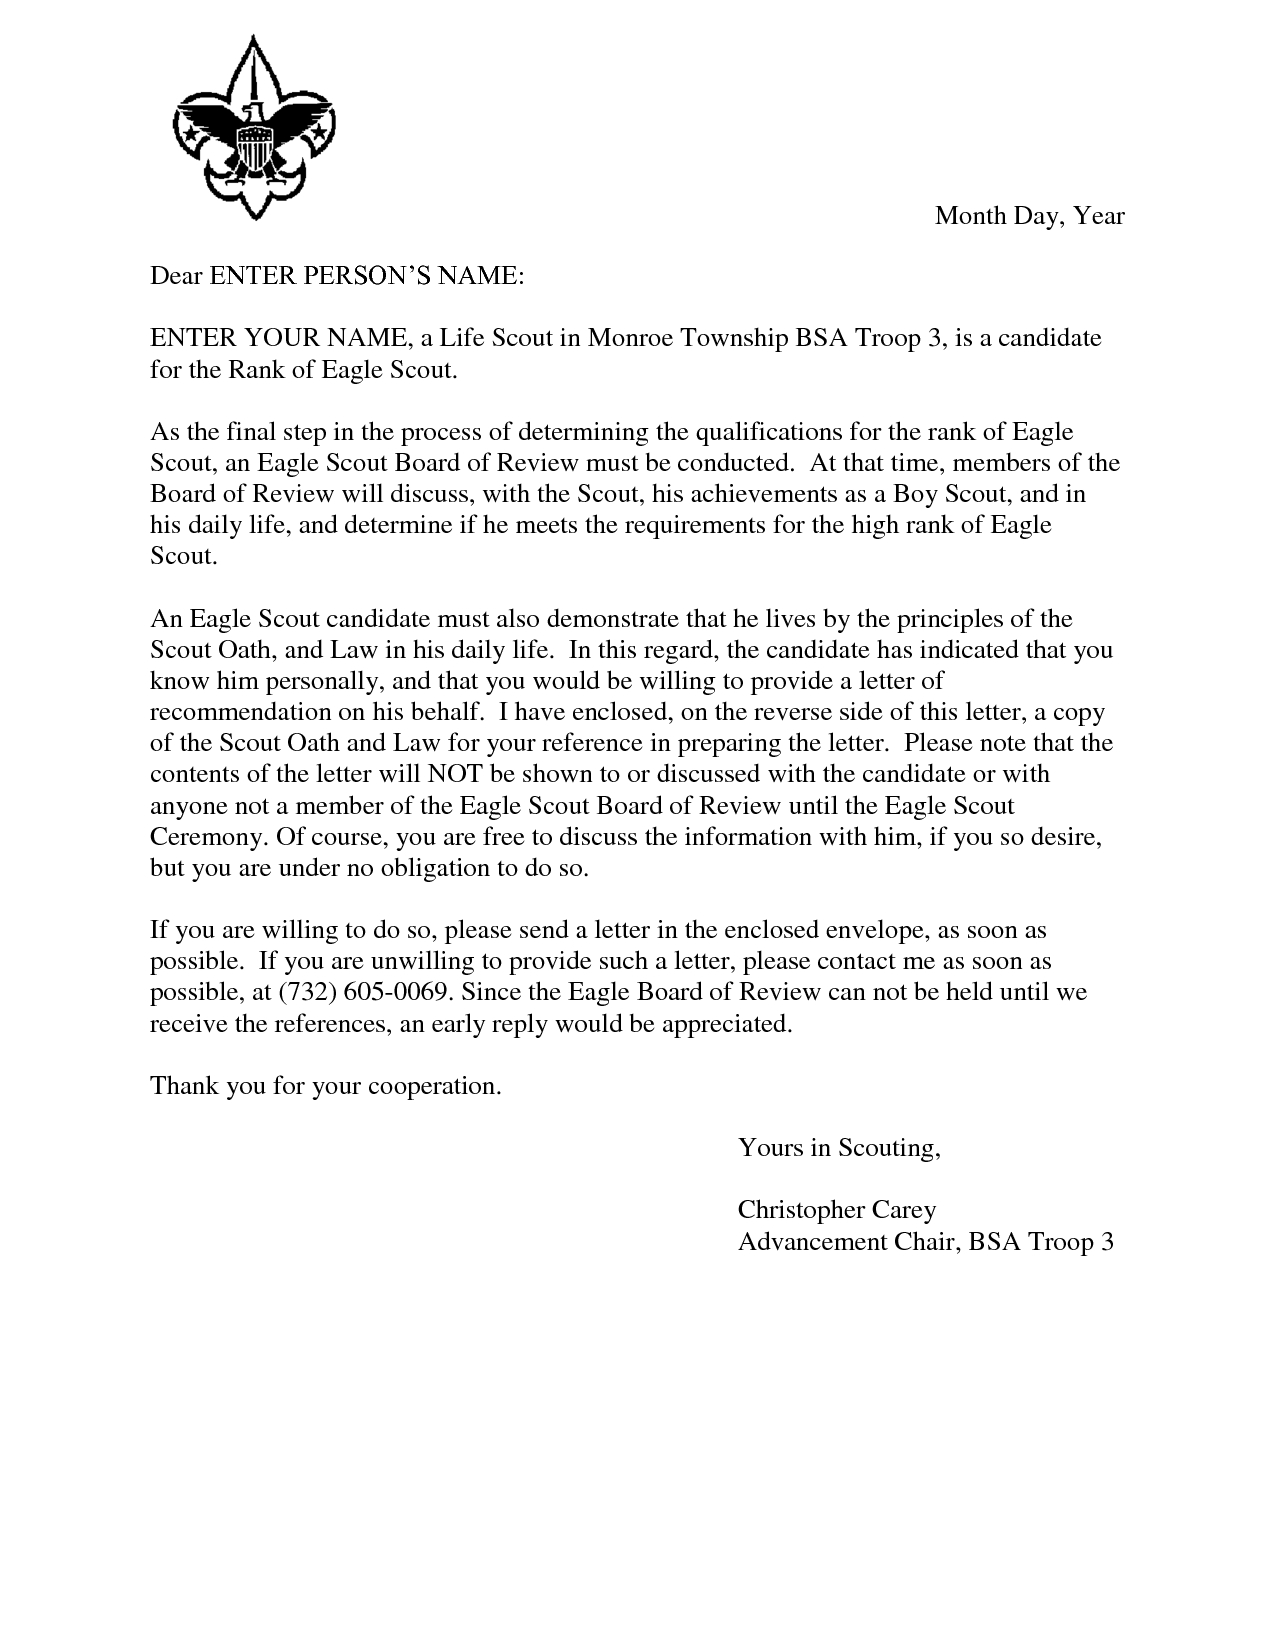 Eagle Recommendation Letter Template - Eagle Scout Reference Request Sample Letter Doc 7 by Hfr990q